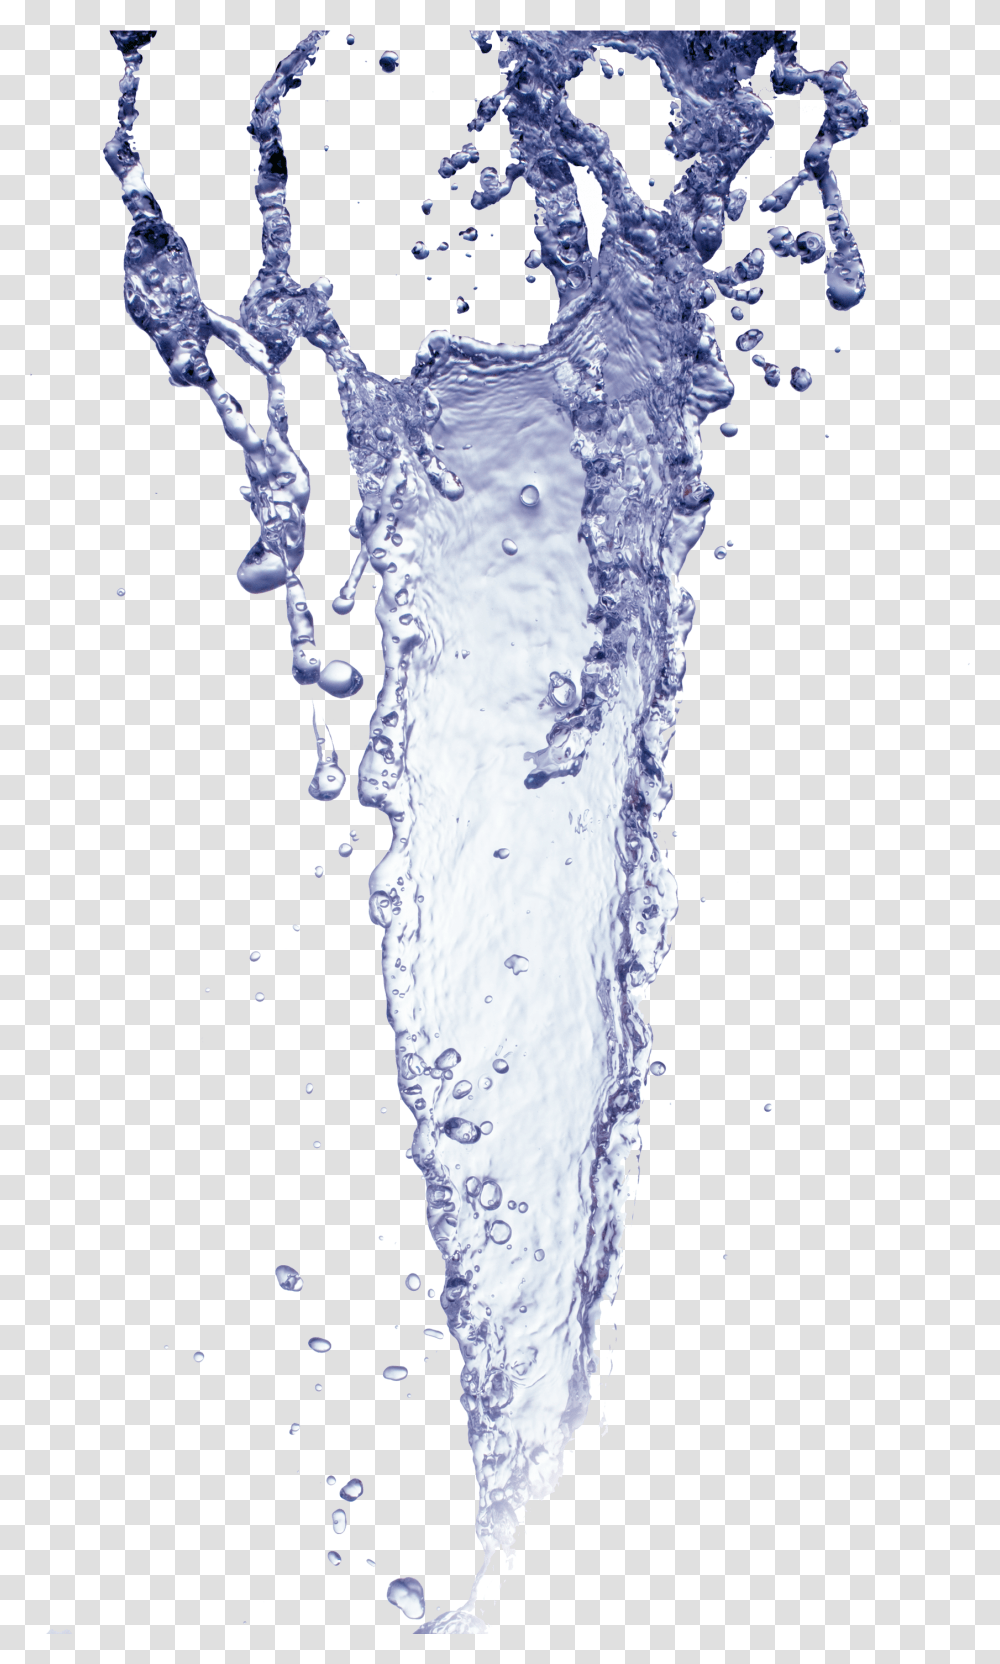 Water Images And Background Water Spilling, Outdoors, Droplet, Nature, Ice Transparent Png